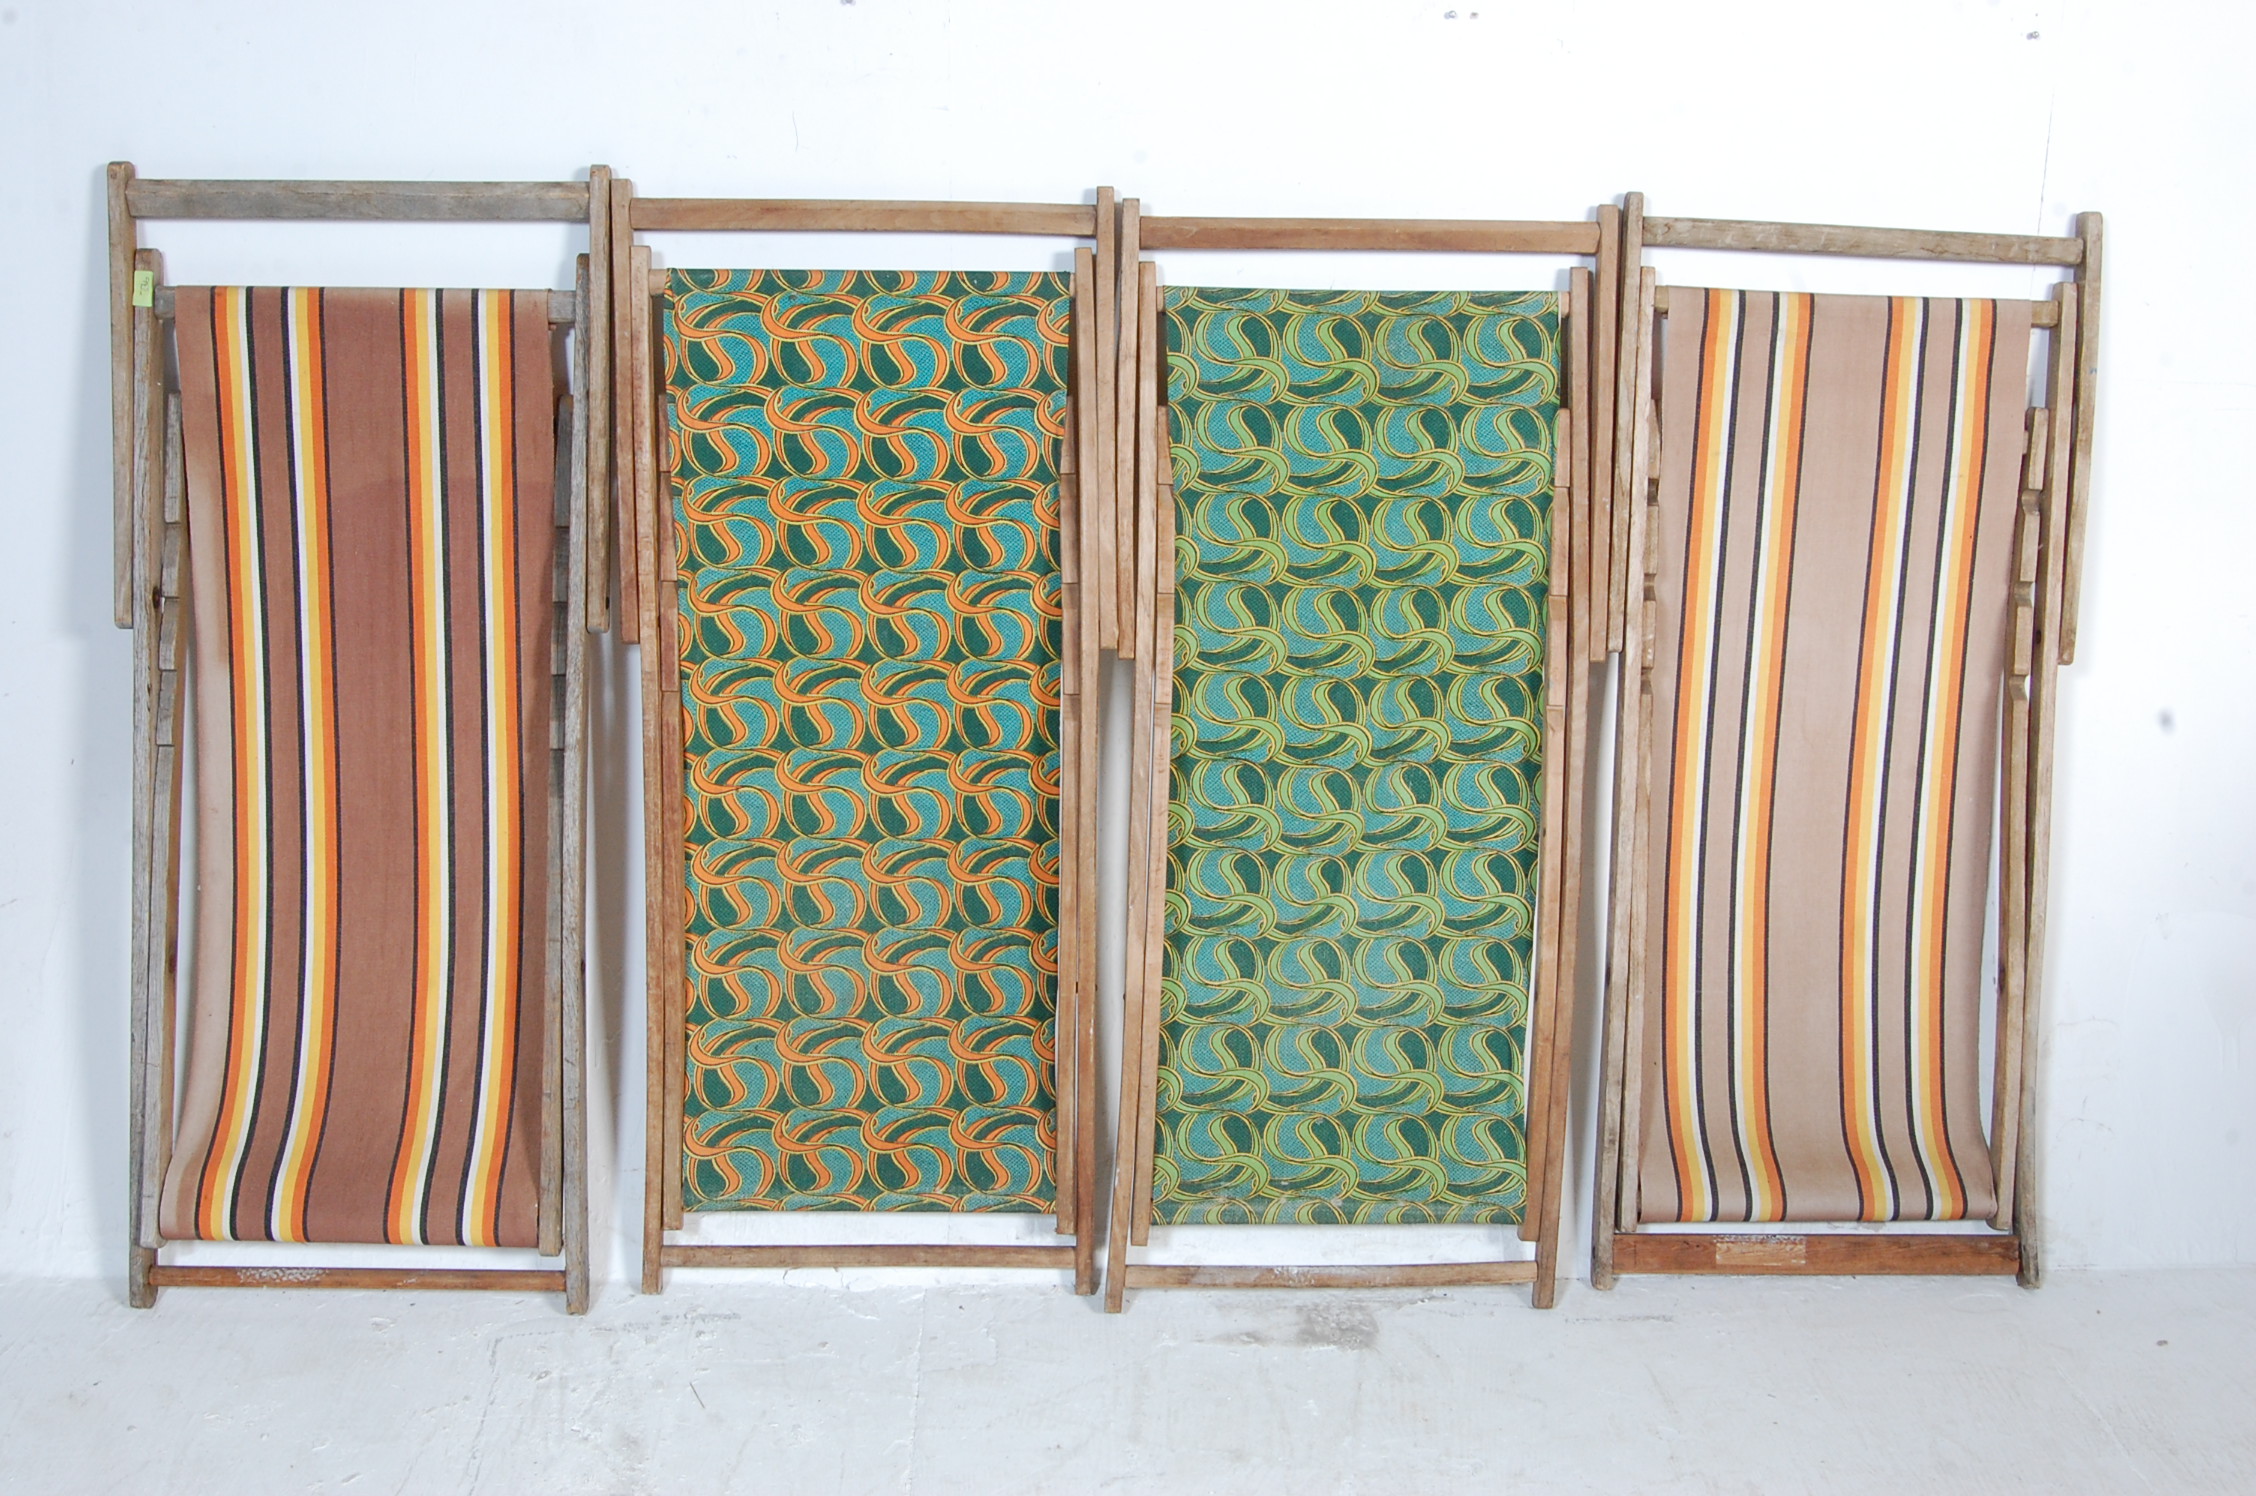 COLLECTION OF FOUR VINTAGE 20TH CENTURY DECK CHAIRS - Image 6 of 6